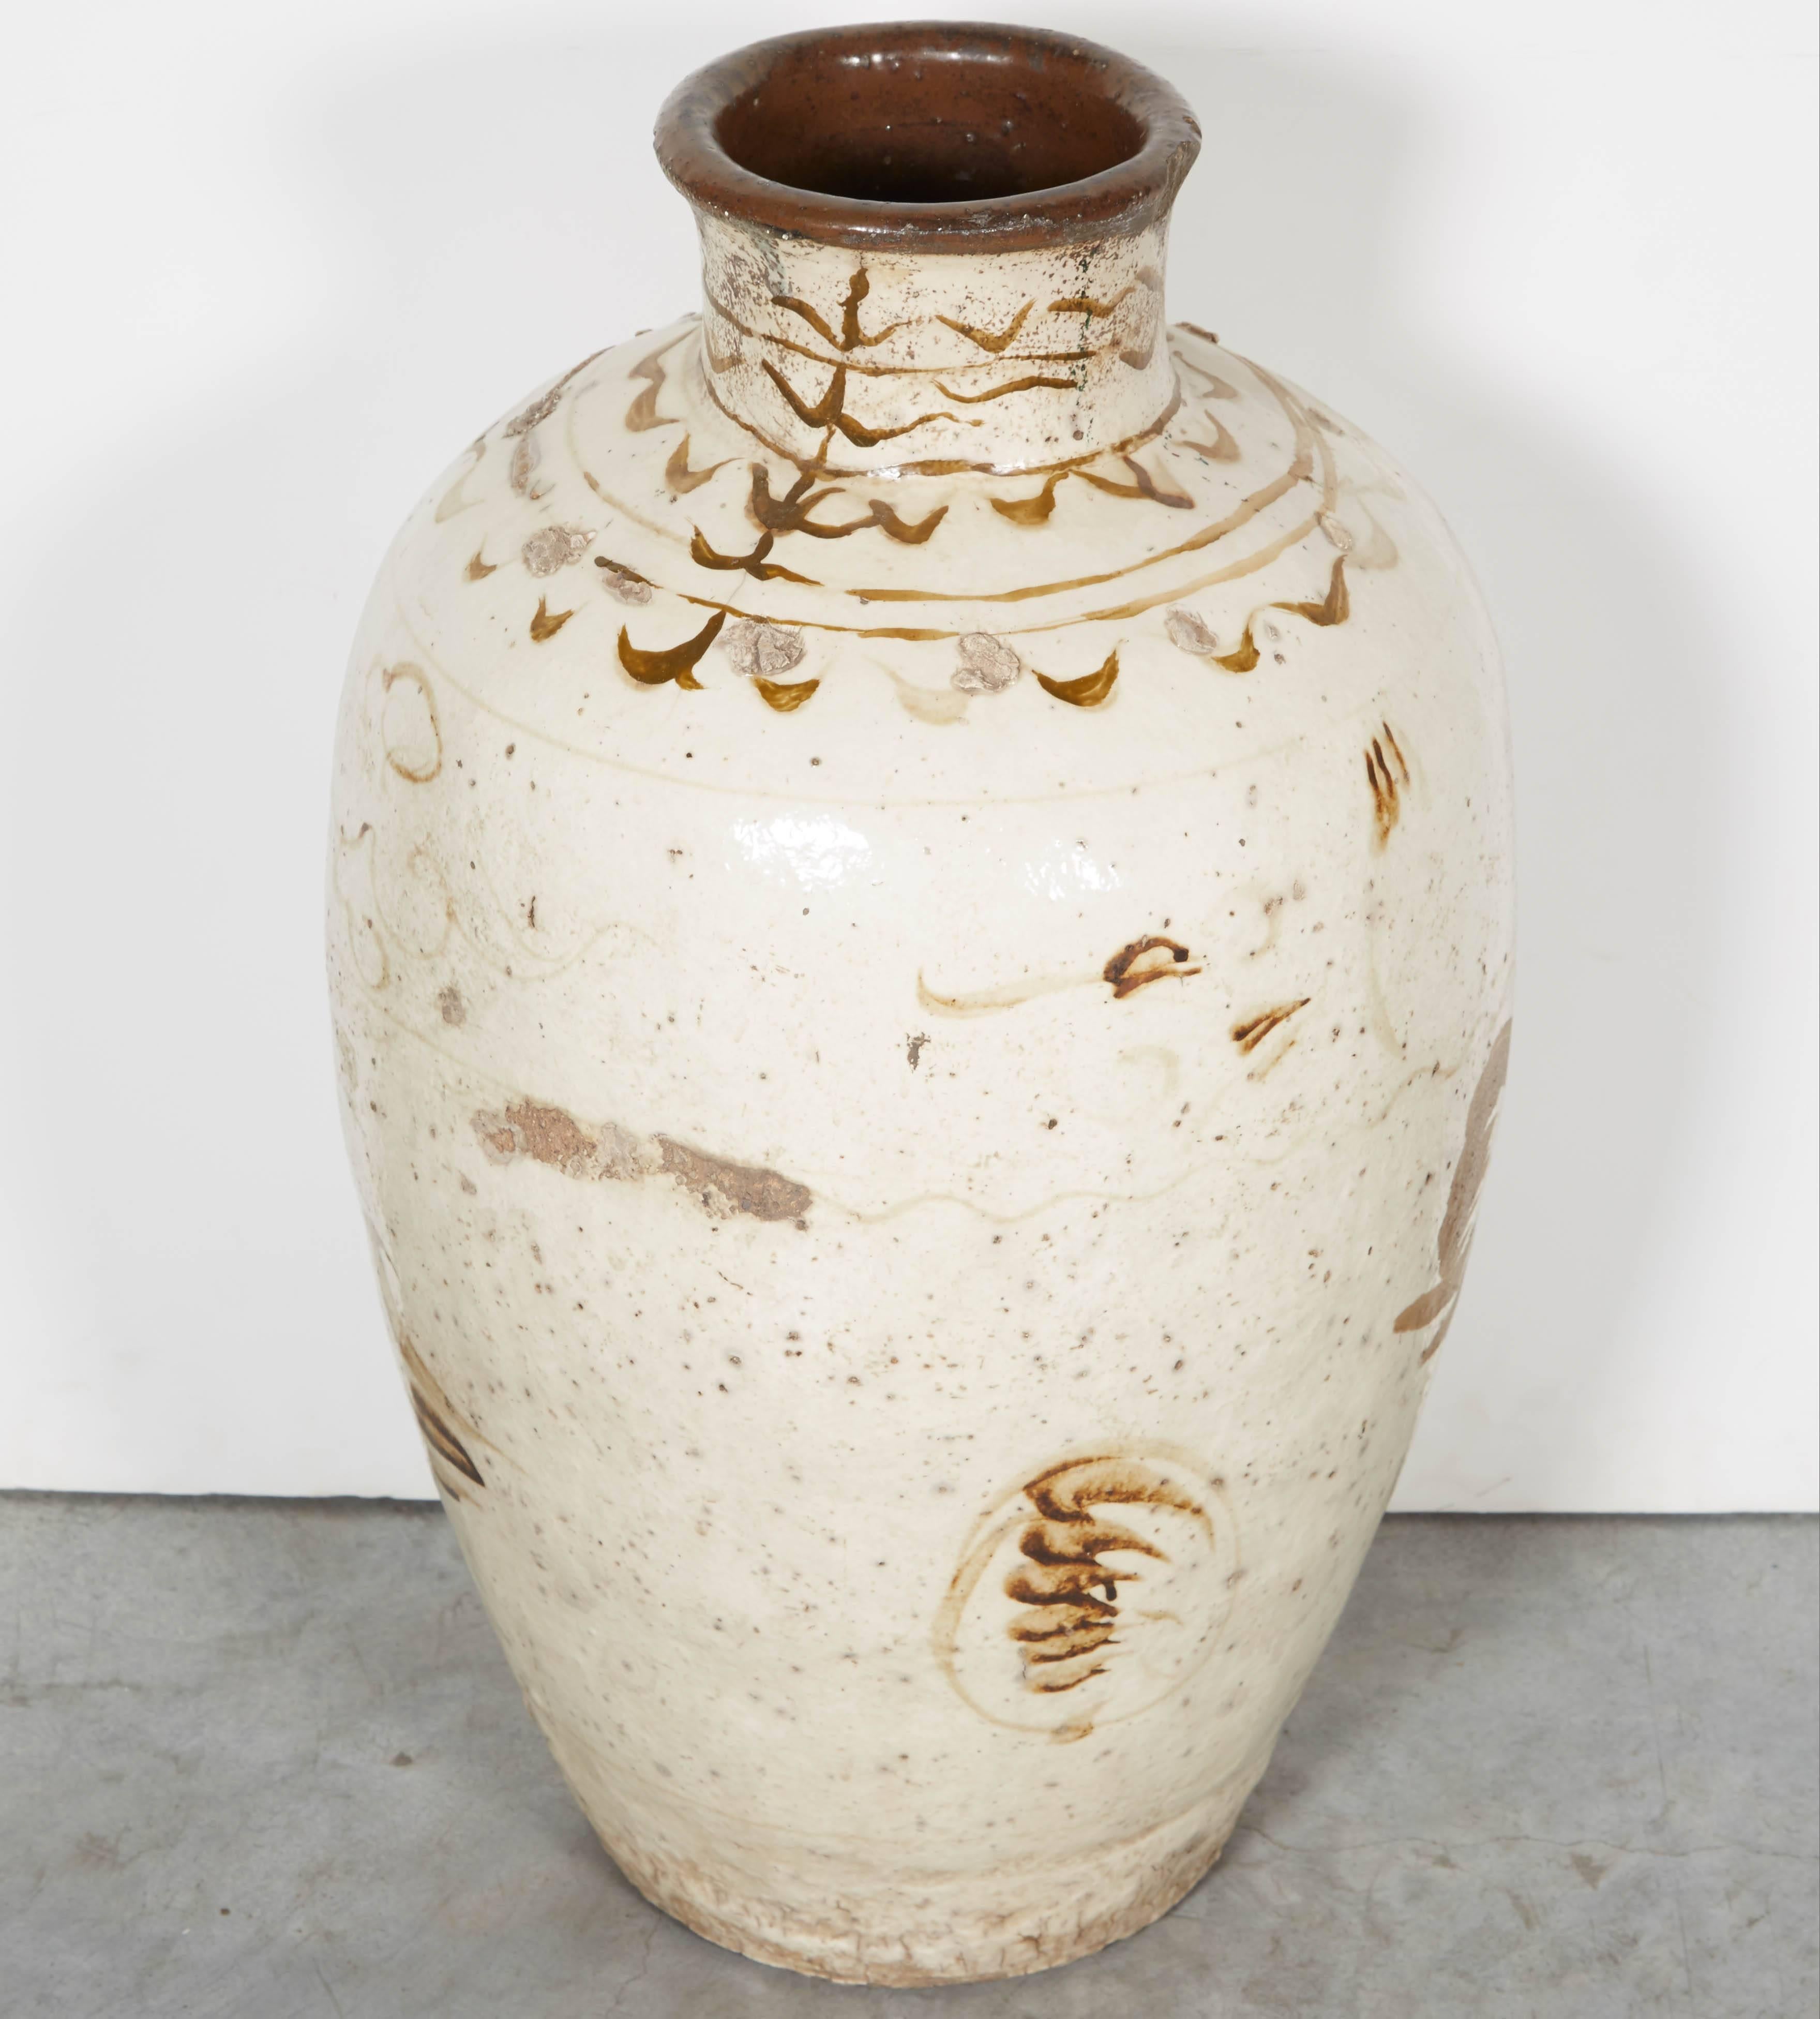 A classically decorated 19th century wine jar from Shanxi province. Beautifully glazed and gracefully shaped, circa 1800. 
CR656.